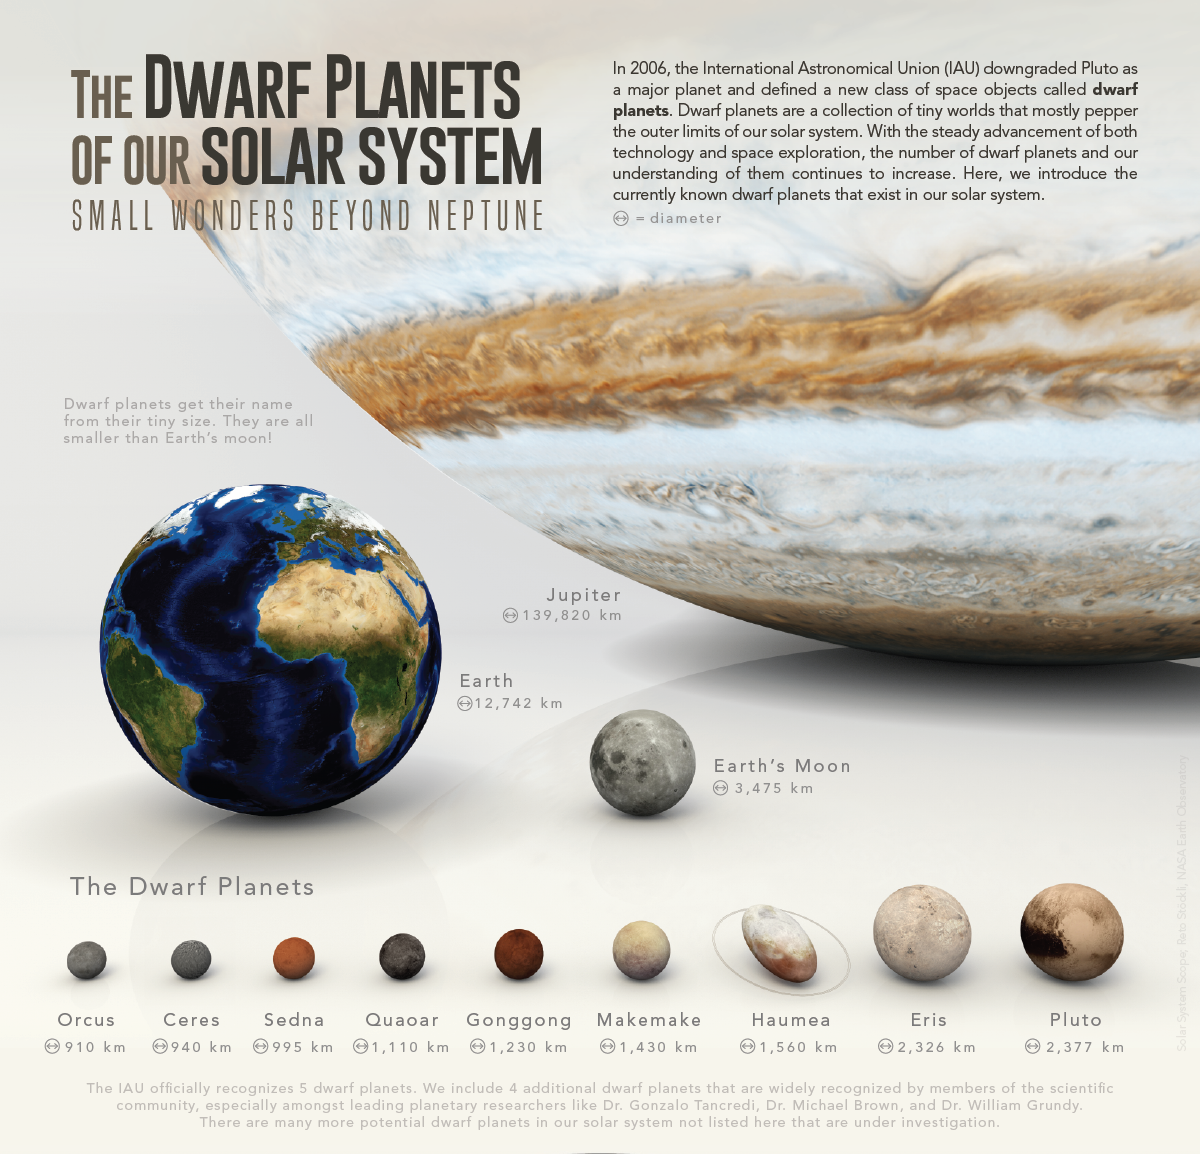 A Visual Introduction to the Dwarf Planets of our Solar System